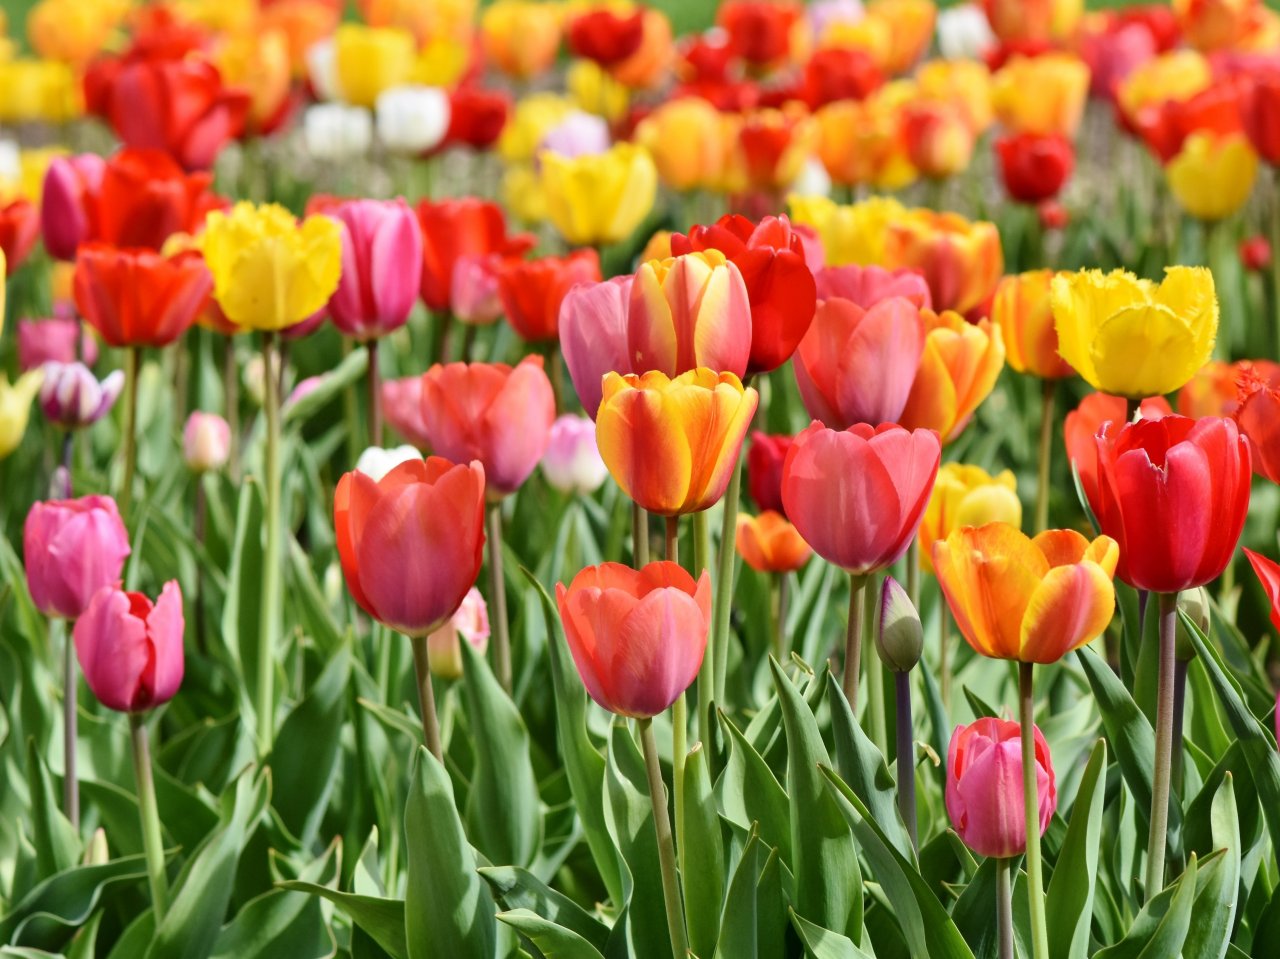 Tulips jigsaw puzzle - collect free online jigsaw puzzles